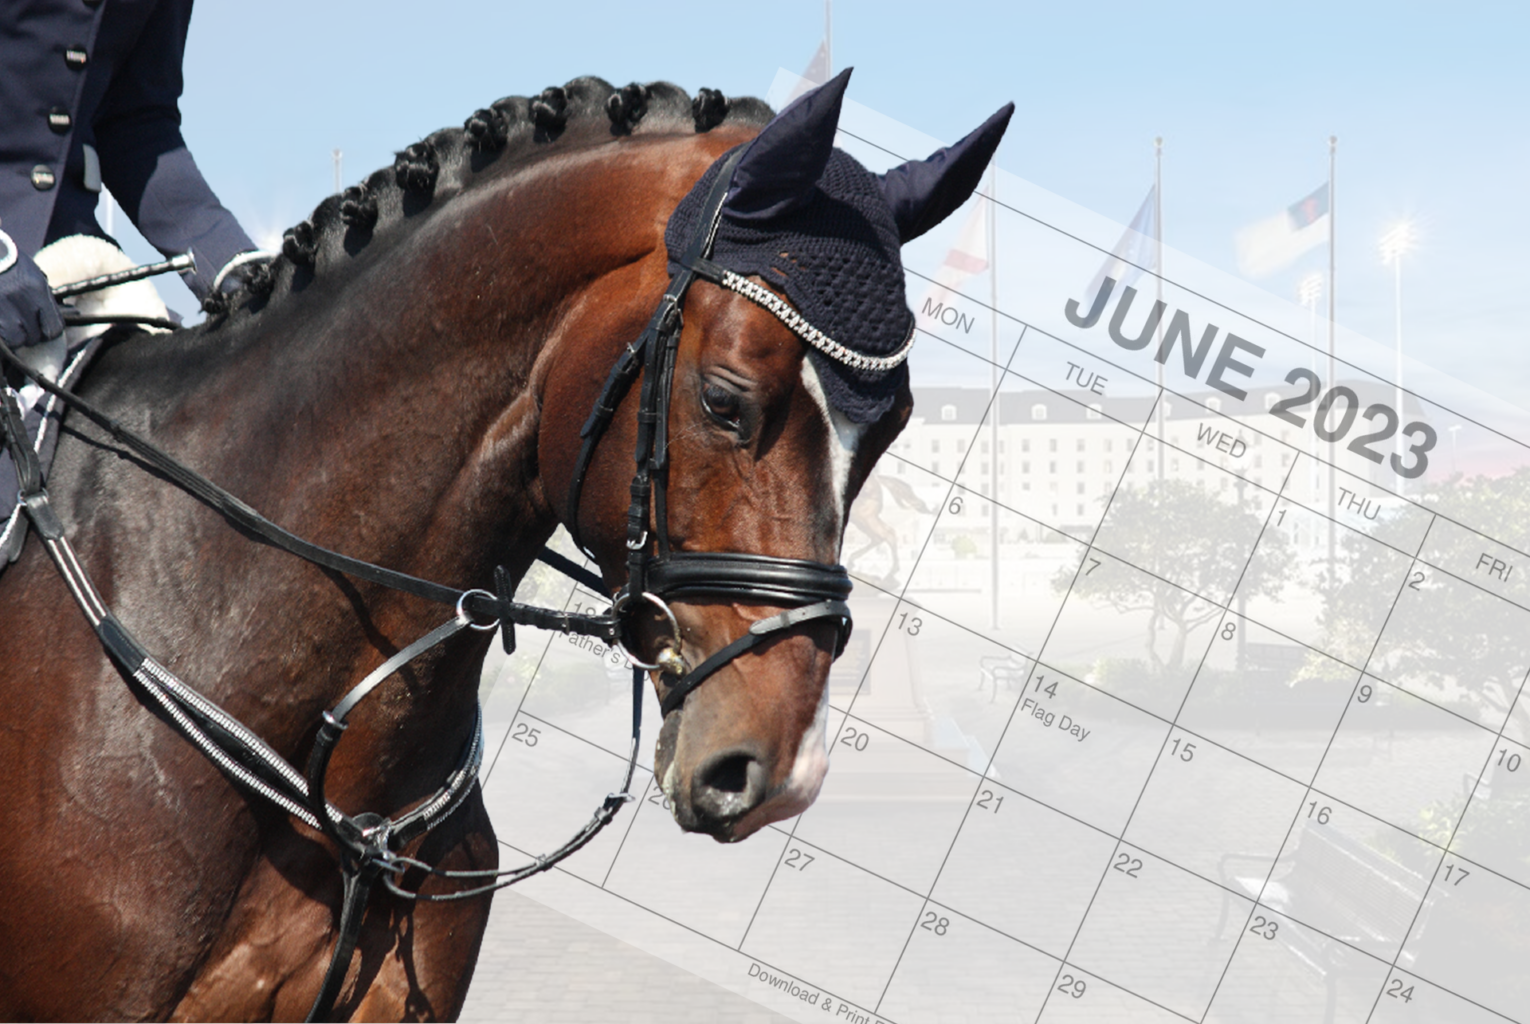 June events at the World Equestrian Center